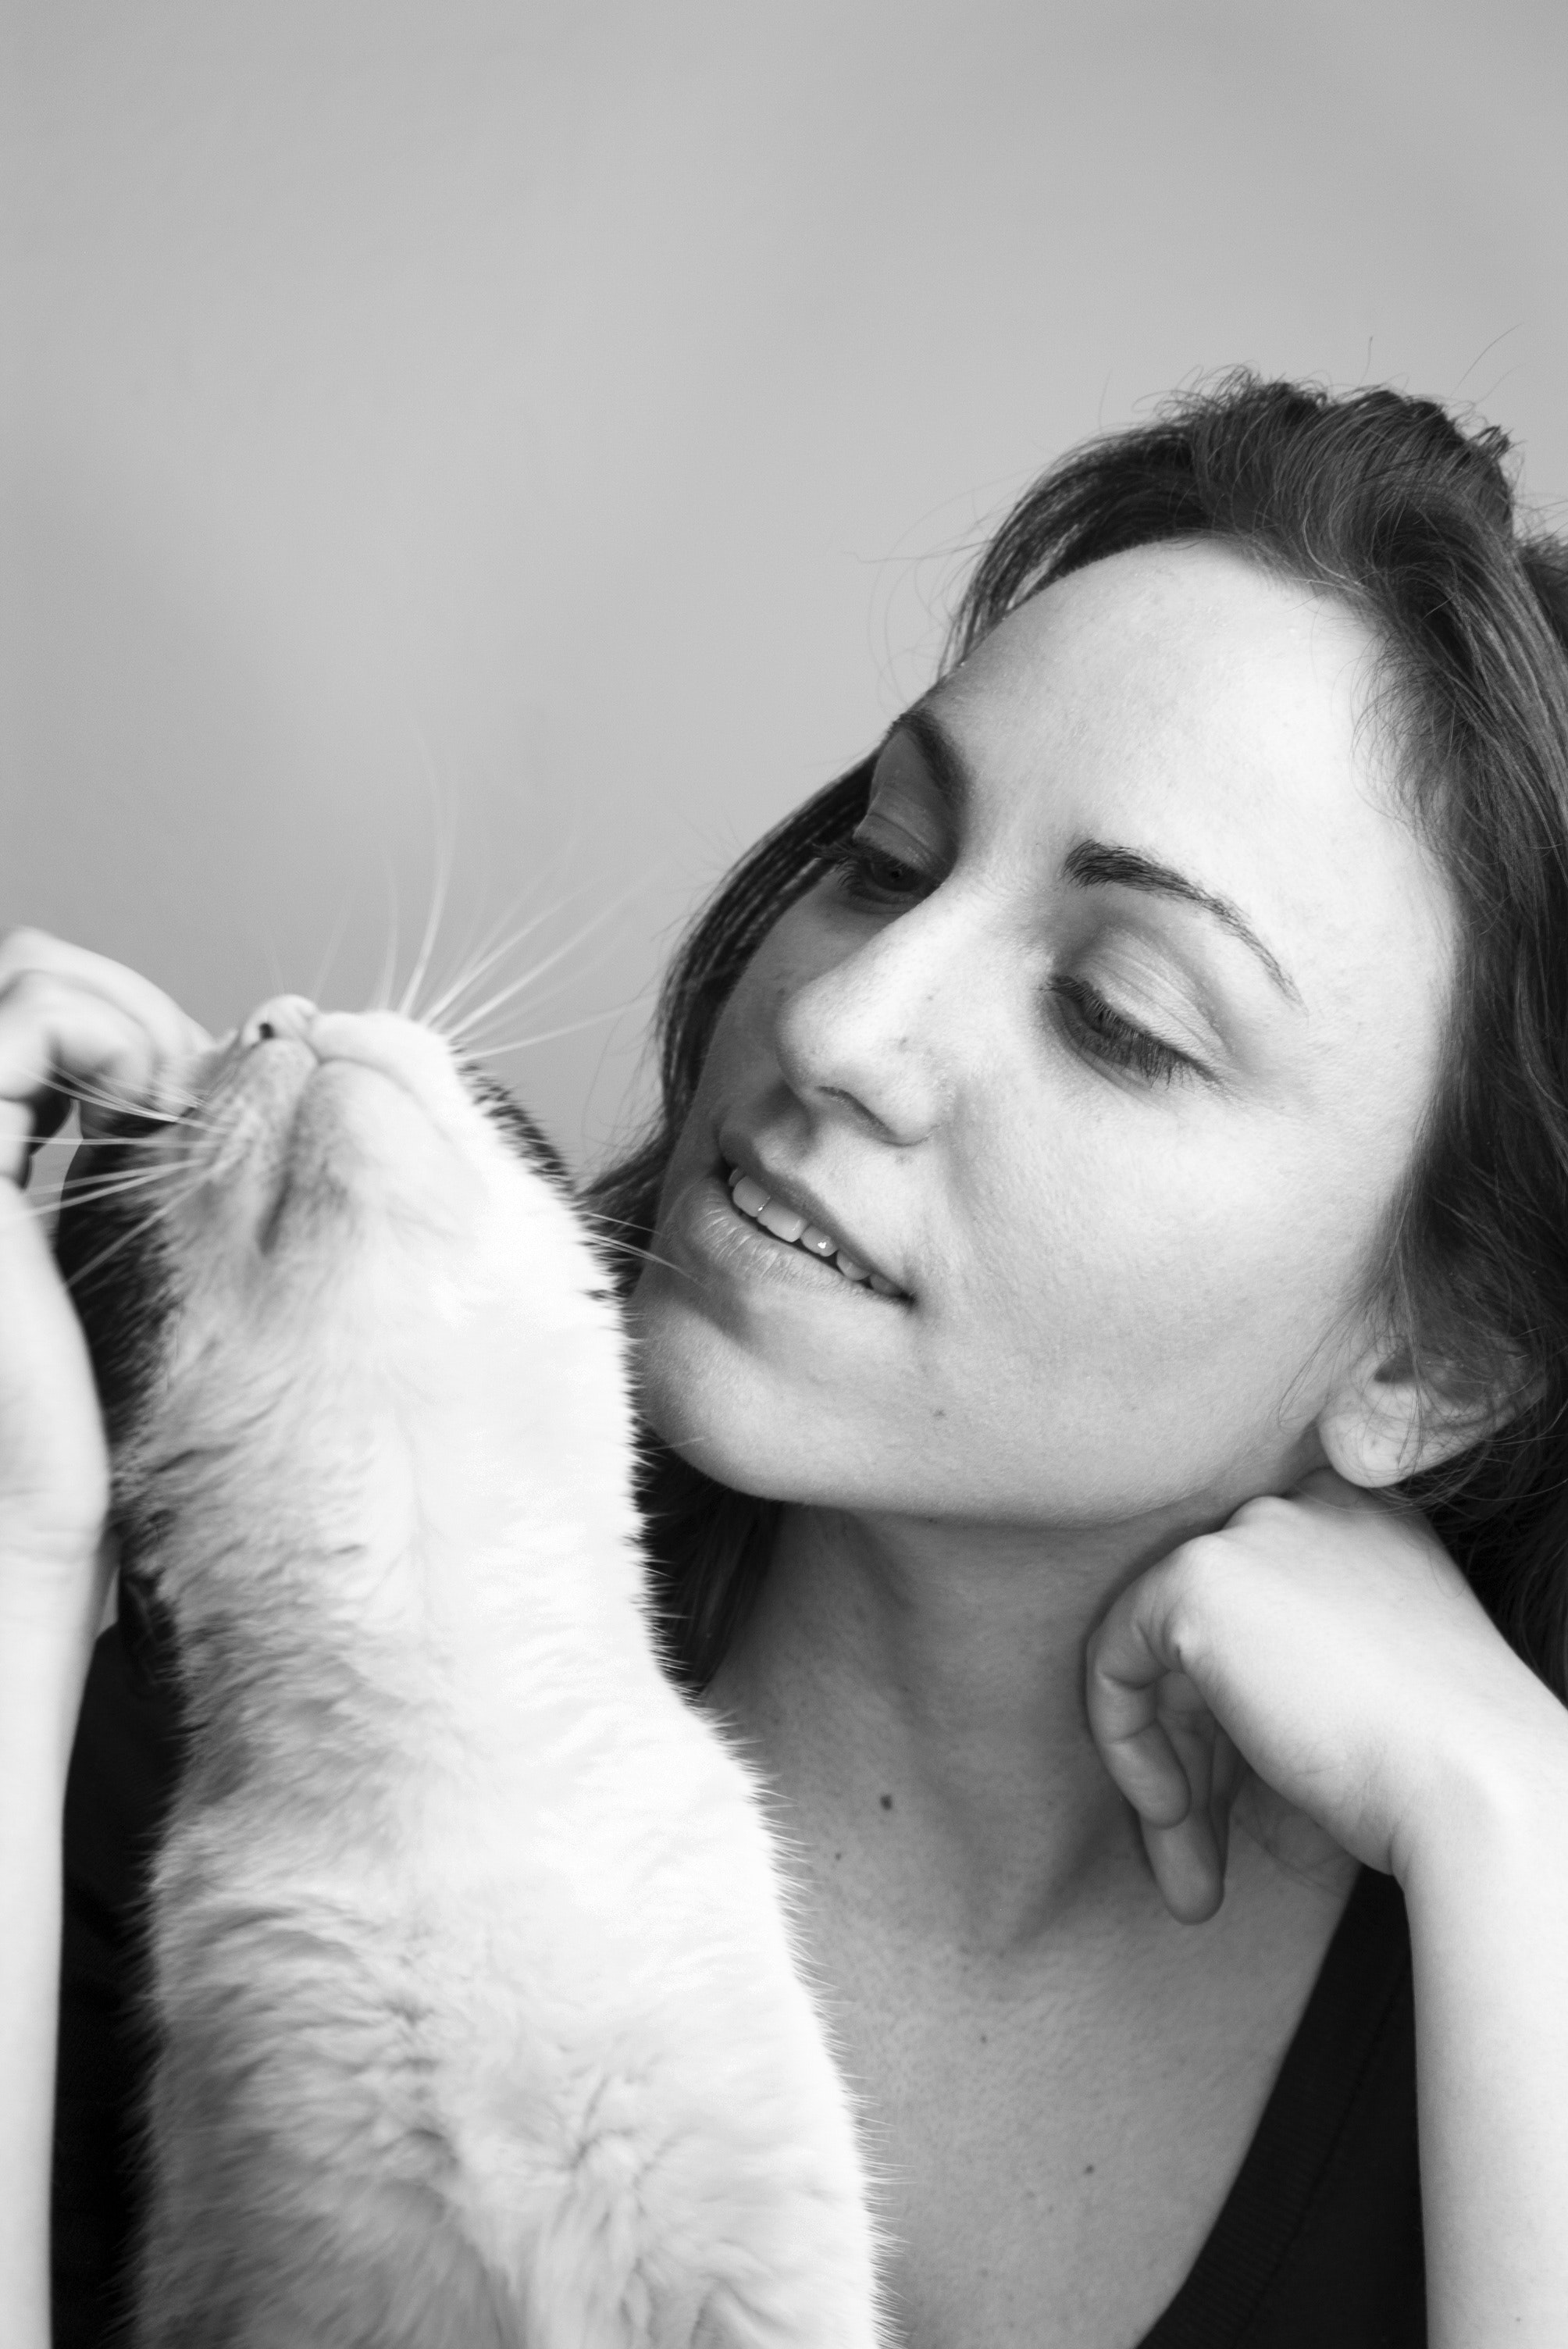 Grayscale photo of woman and cat